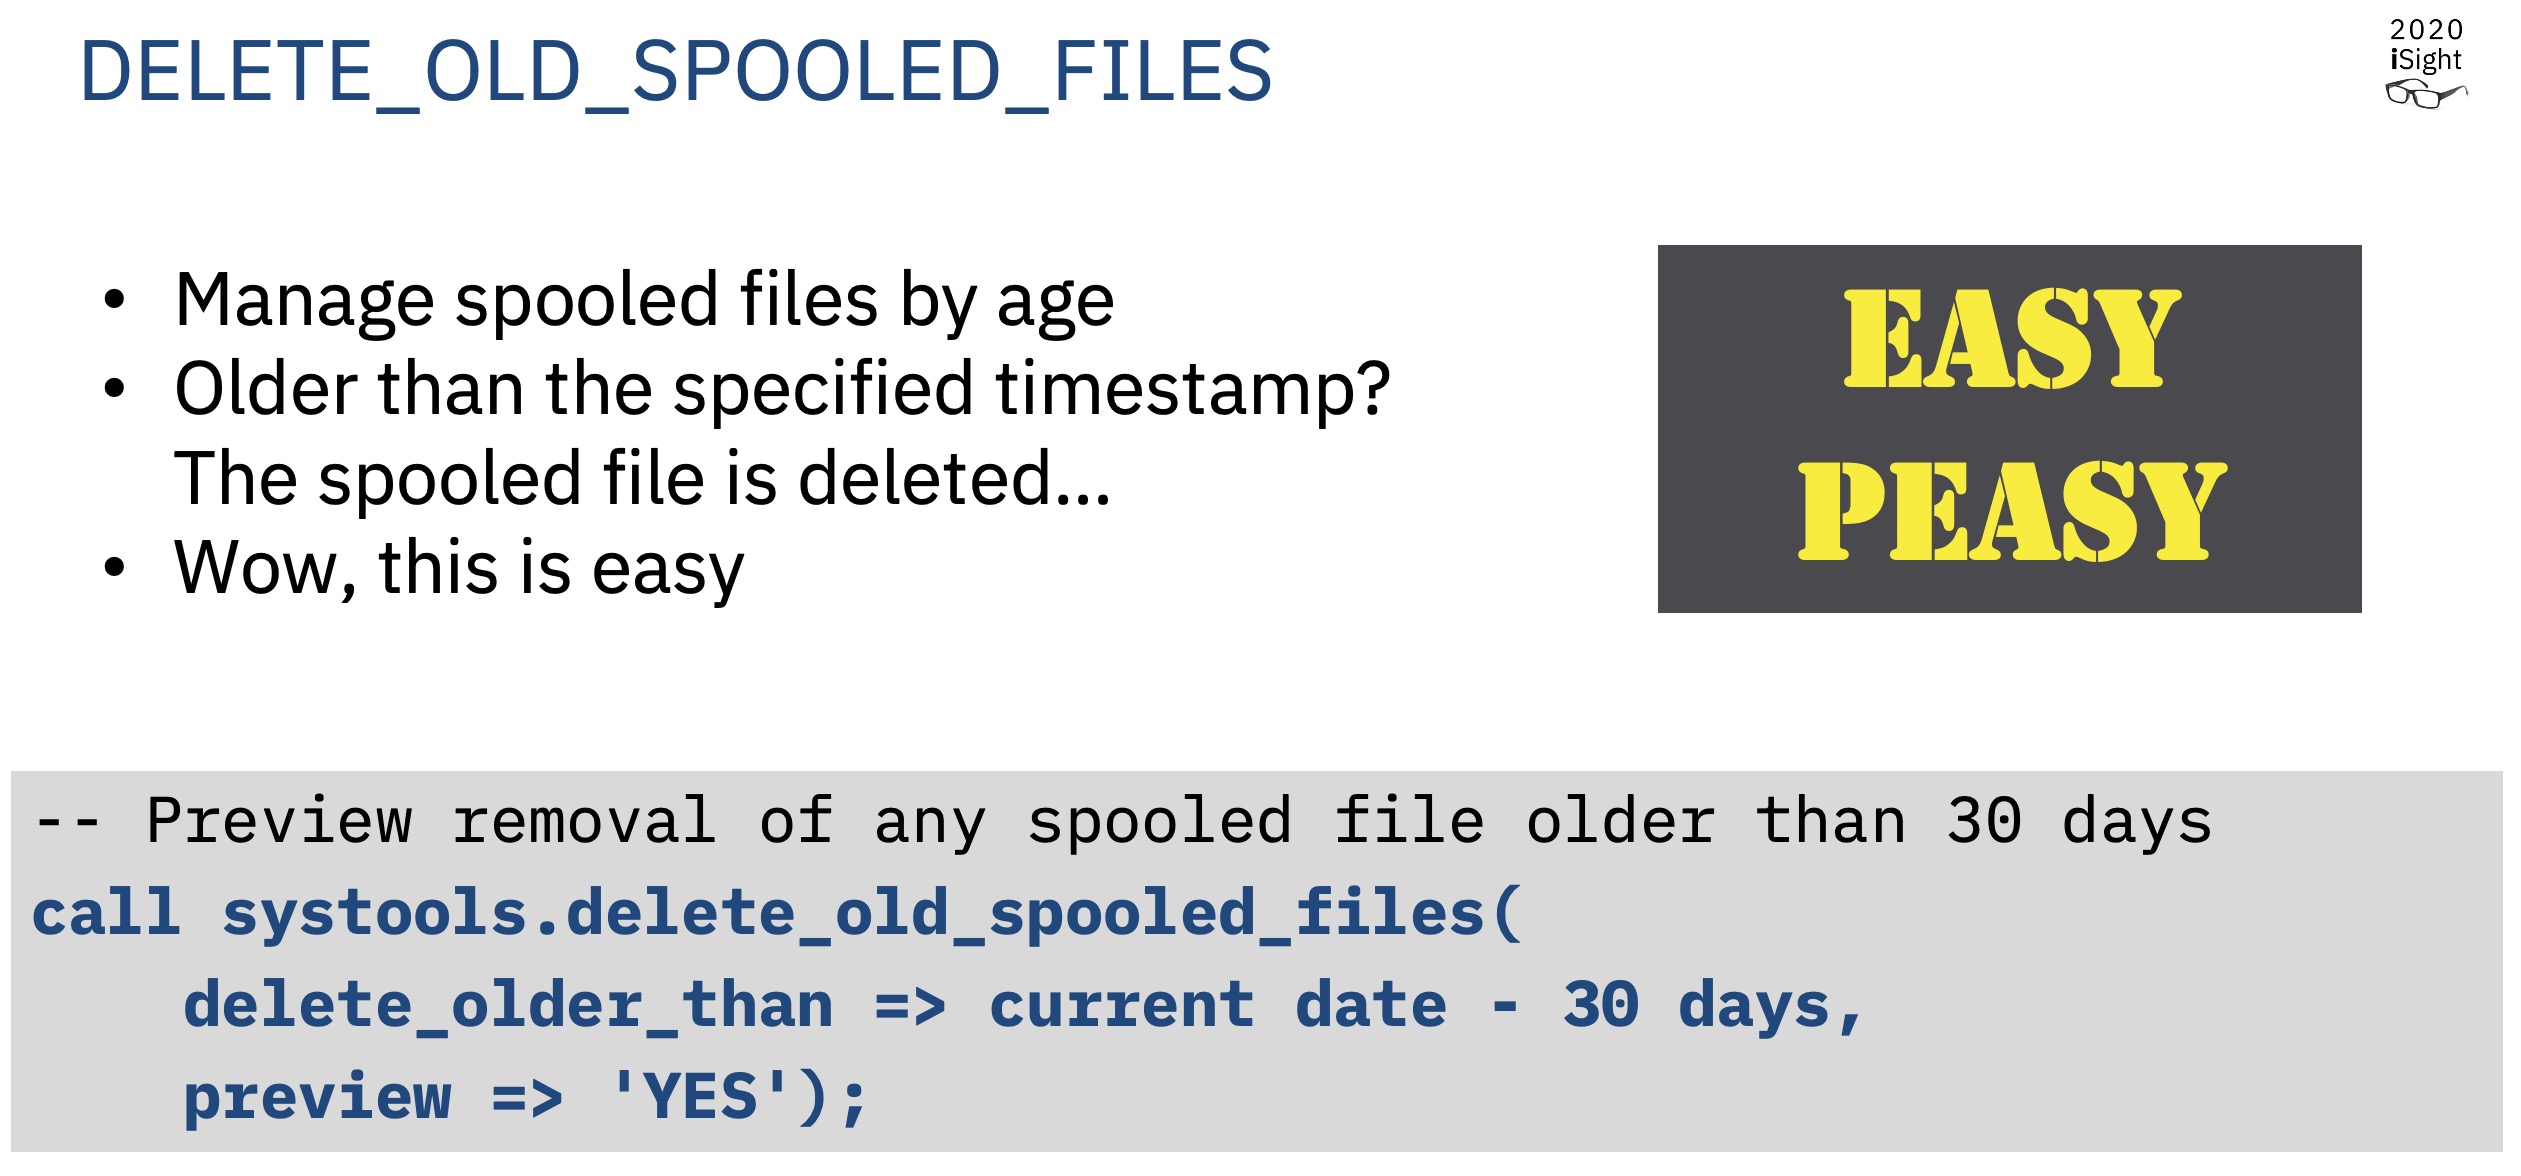 Systools procedure to identify and delete old spooled files